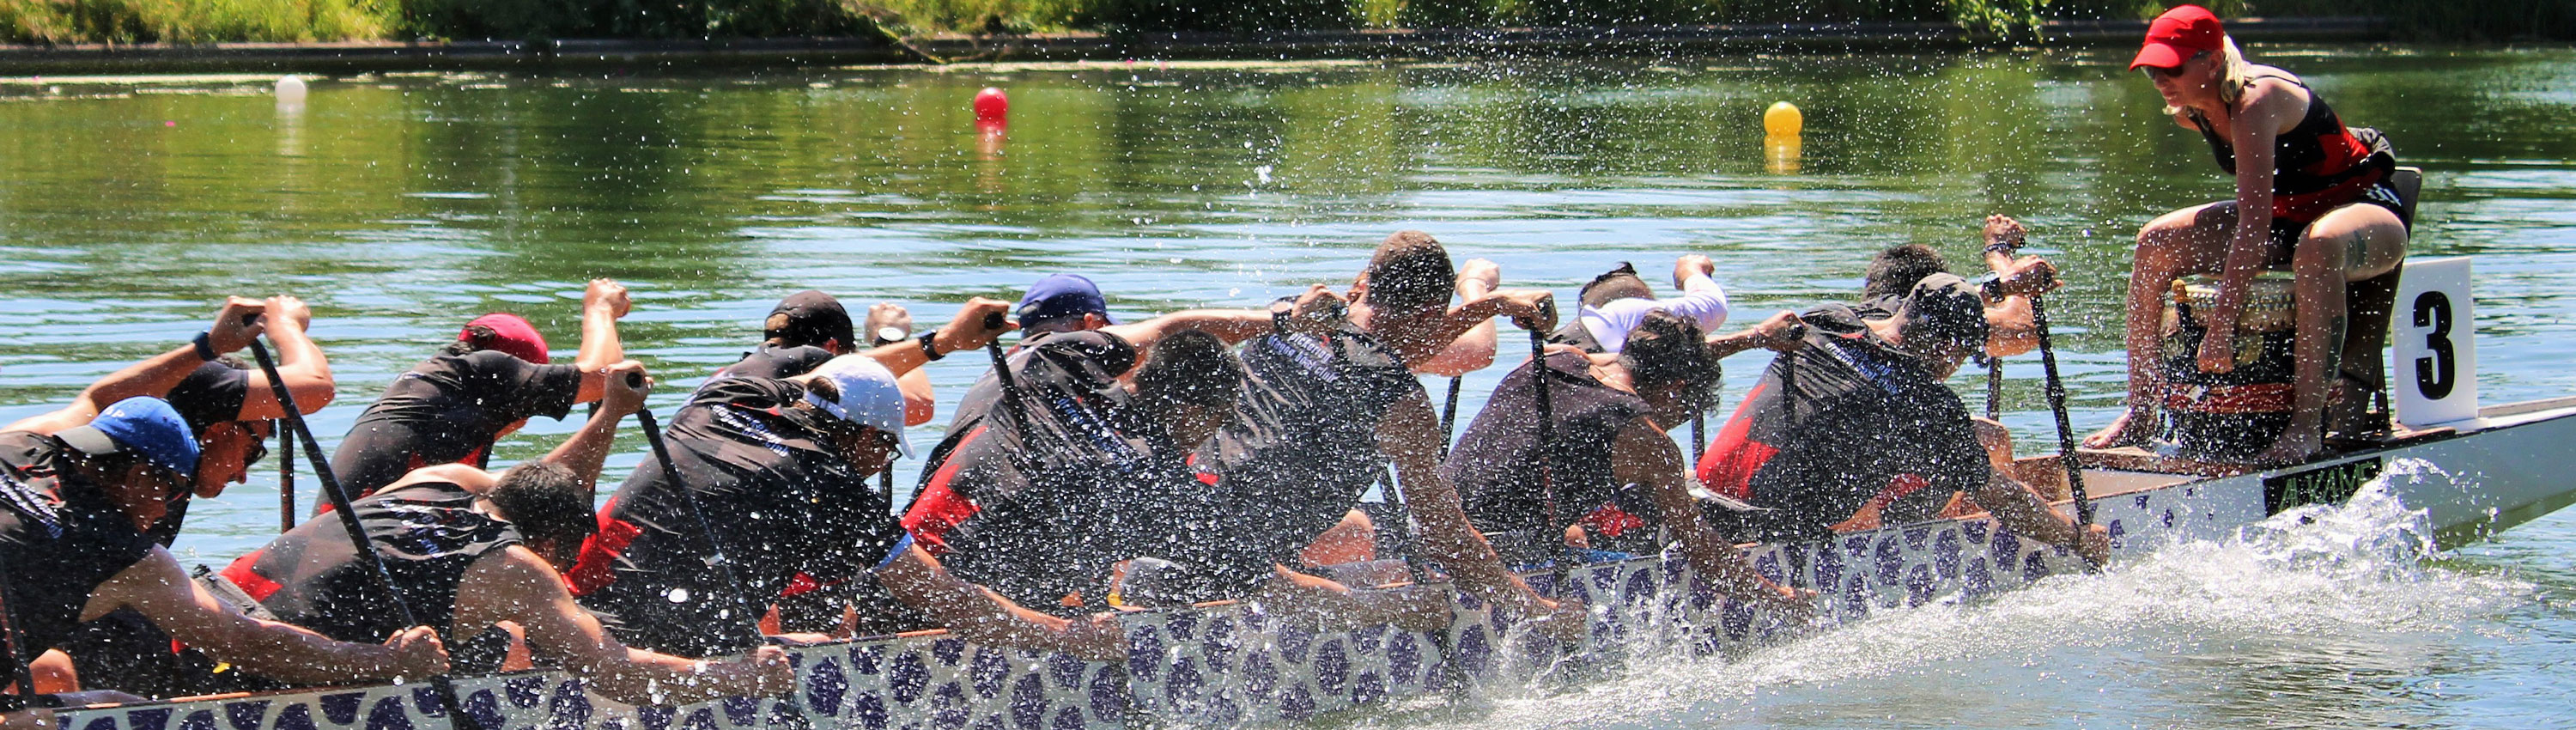 competitive dragon boat race